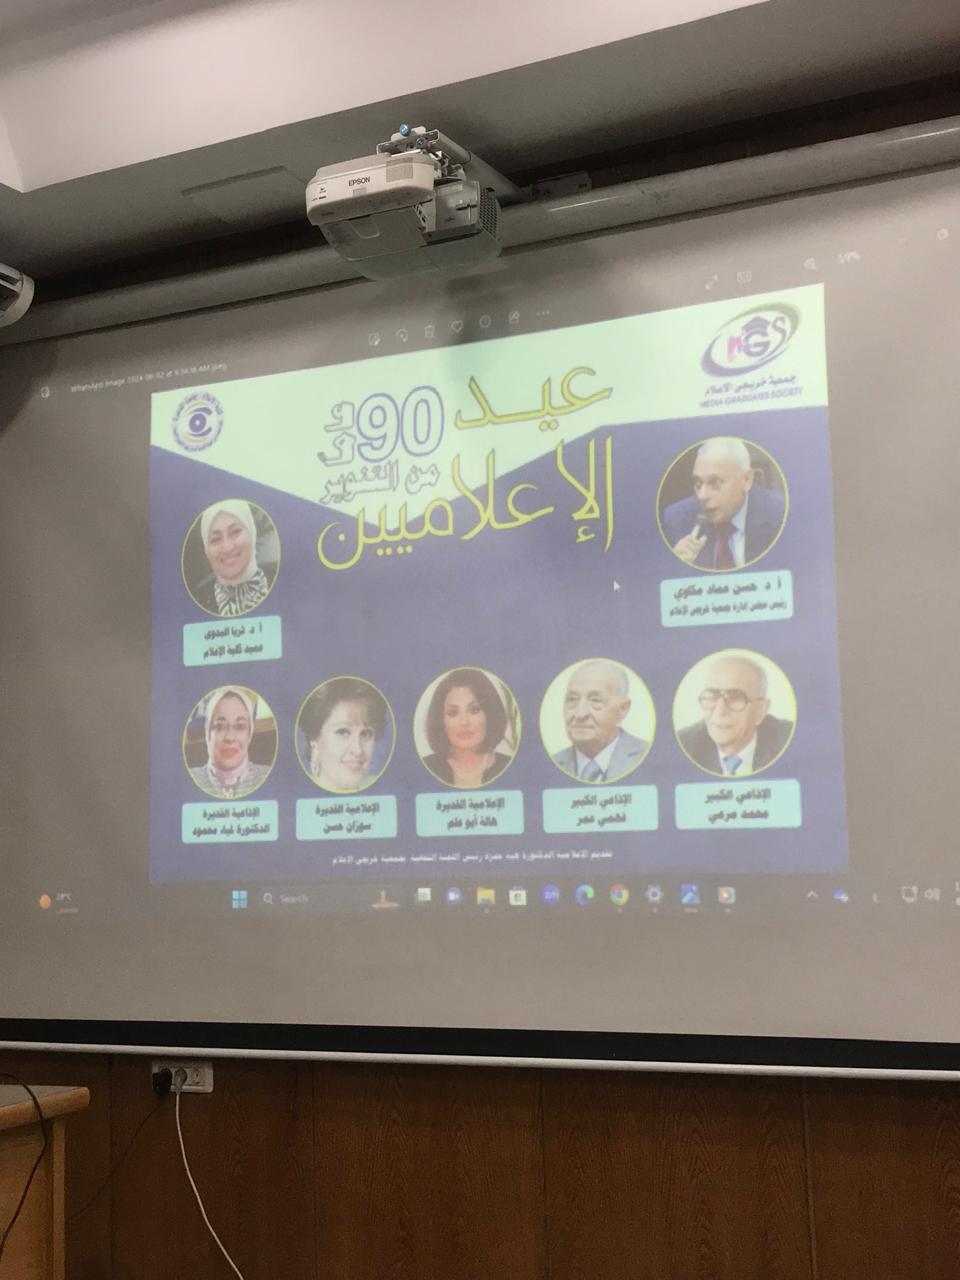 Under the auspices of the Media Alumni Association and the Faculty of Media, Cairo University, media professionals celebrated Media Day